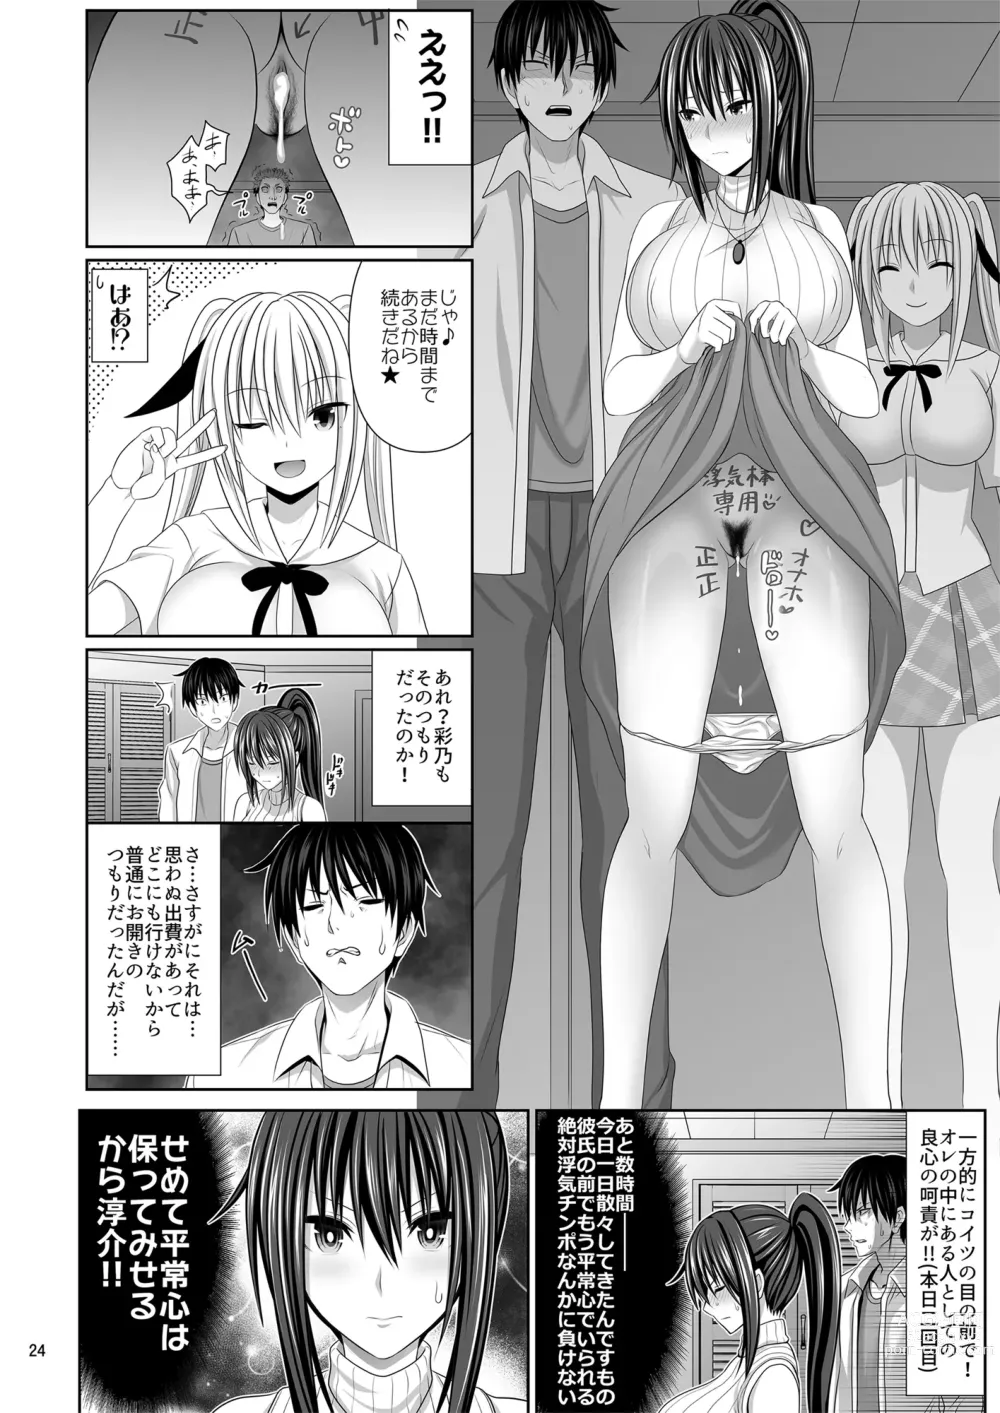 Page 24 of doujinshi SEX FRIEND 6